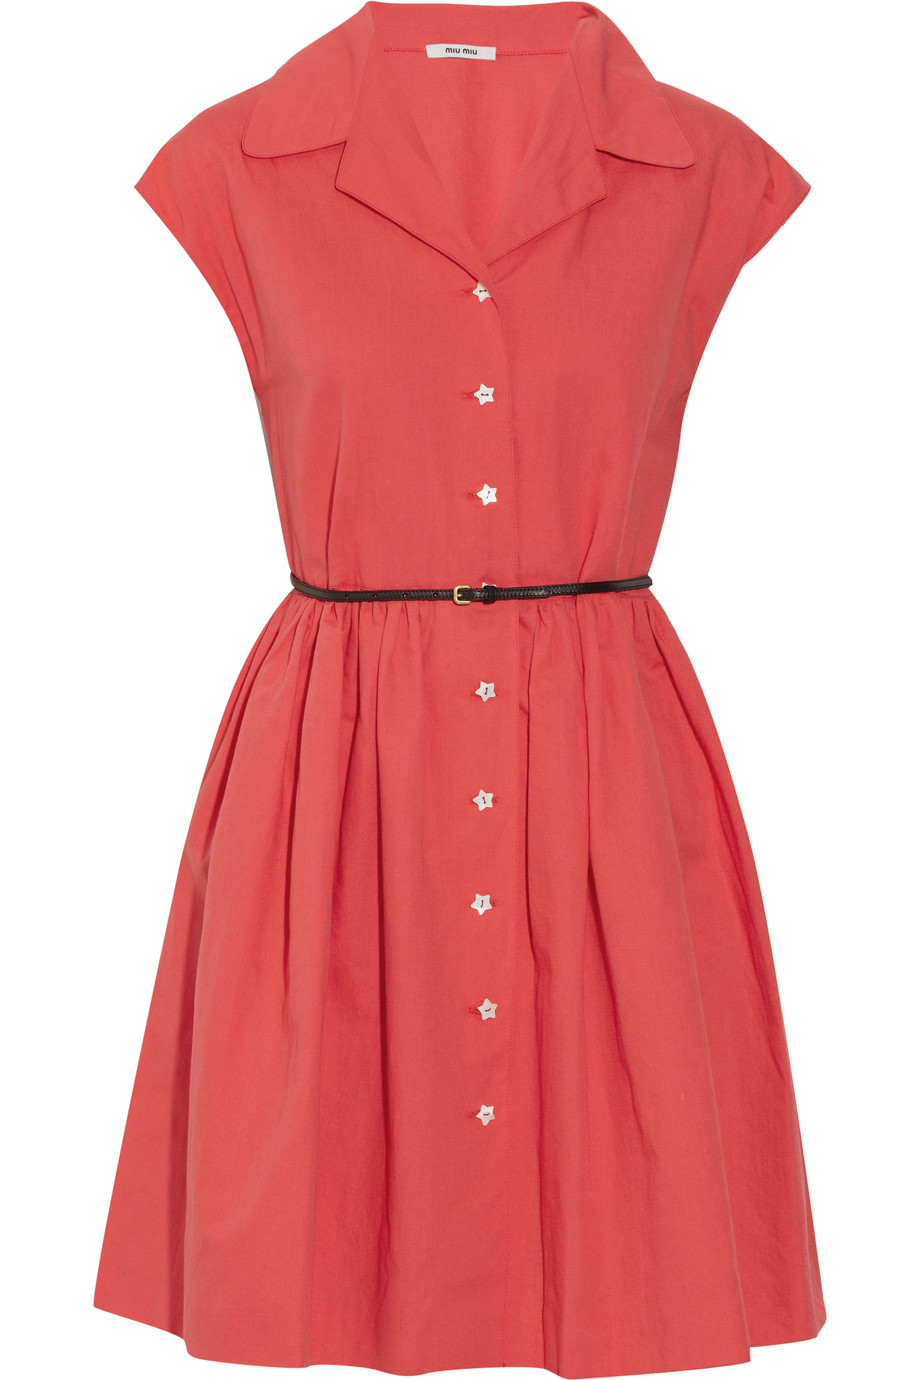 Miu Miu Belted Cotton And Linen-Blend Shirt Dress in Red (coral) | Lyst